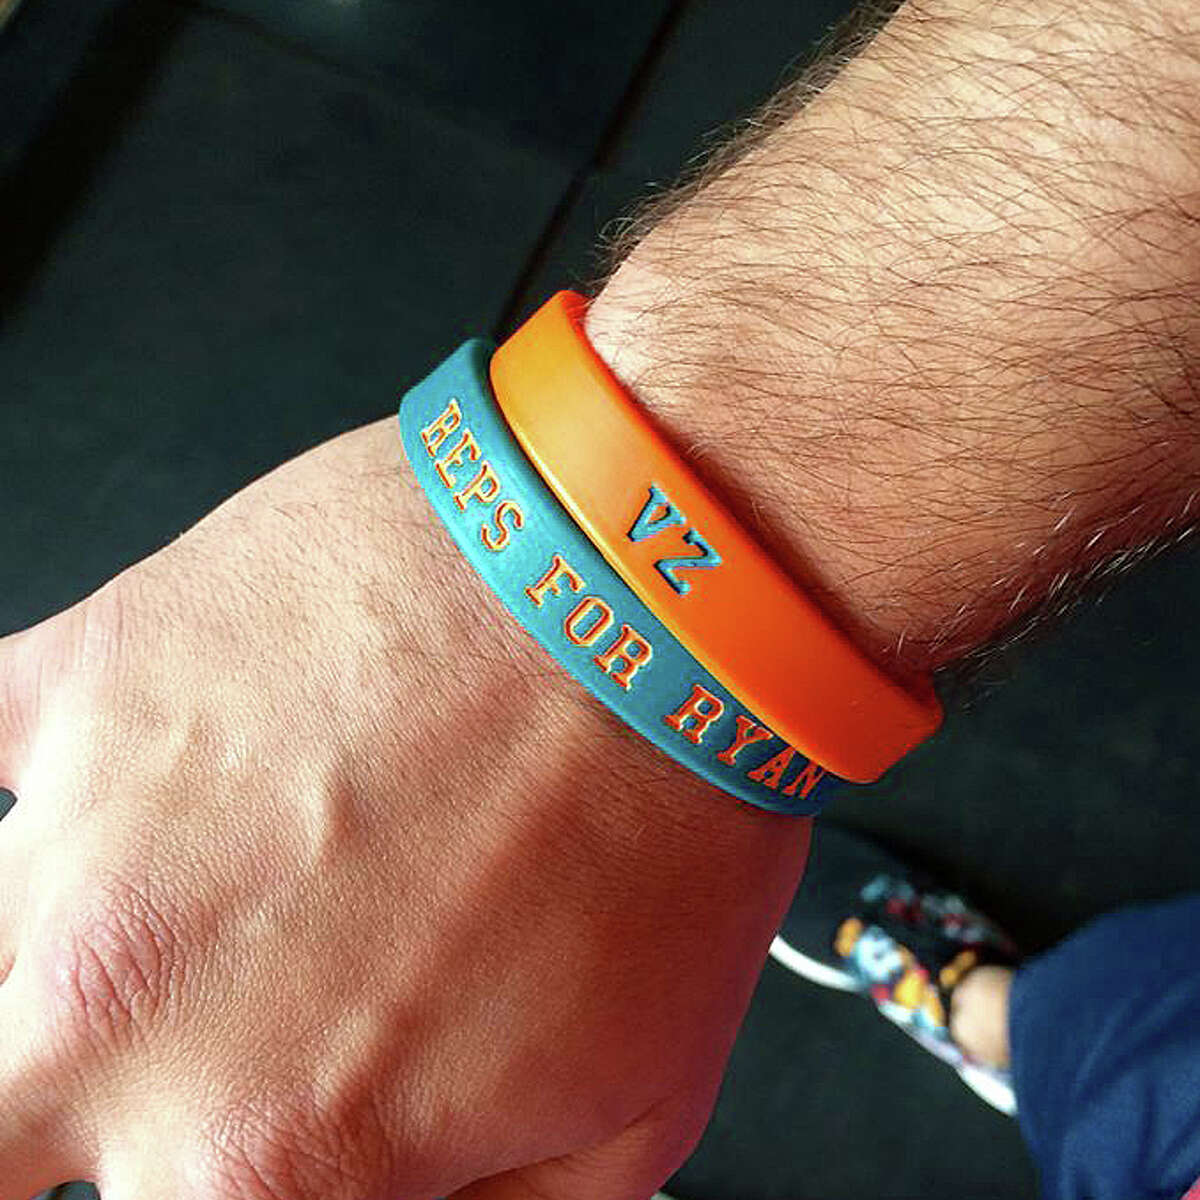 A "Reps for Ryan" wristband, symbol of the fundraising campaign to help Ryan Van Zandt, a 2008 graduate who has a rare form of cancer.